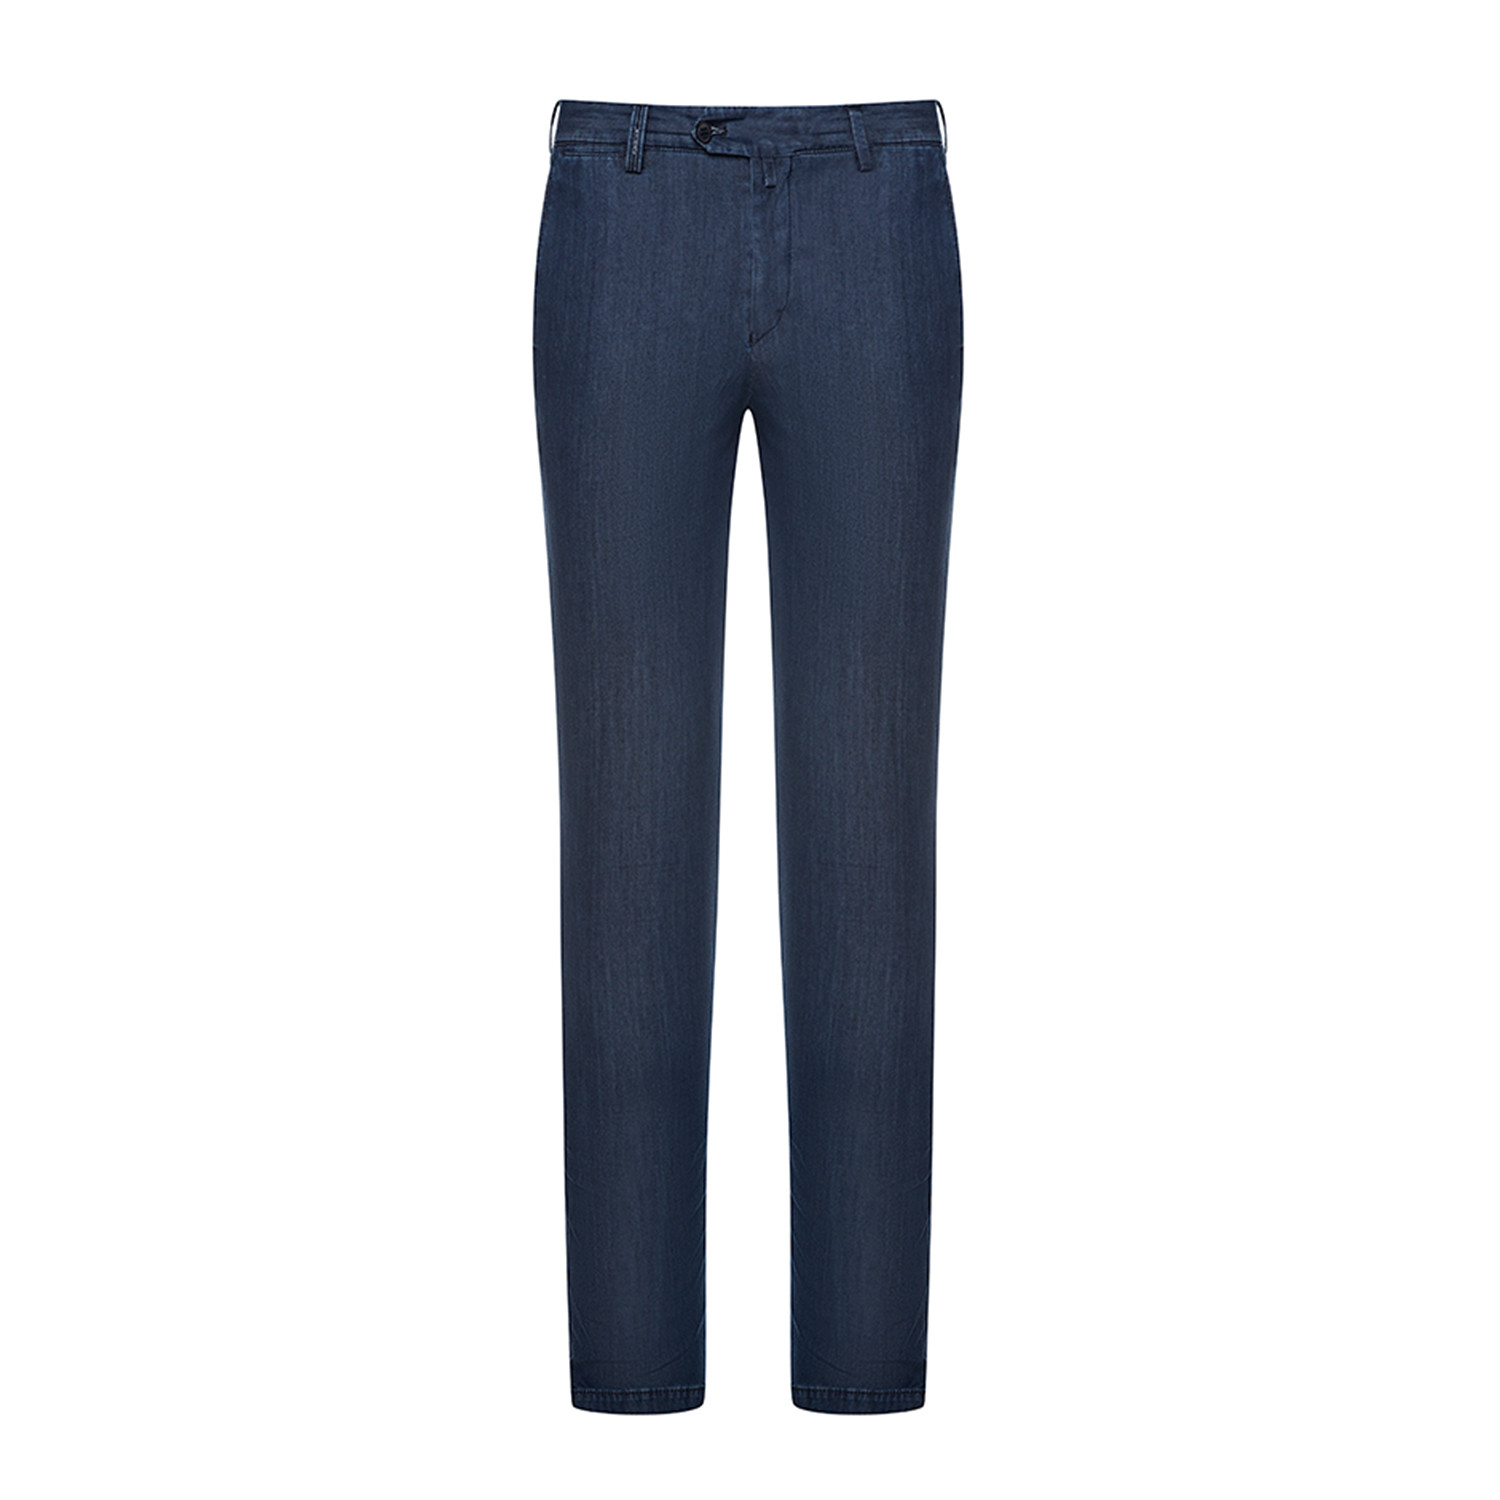 Spring Field Jean Pants // Navy (42) - Apparel Clearance - Touch of Modern